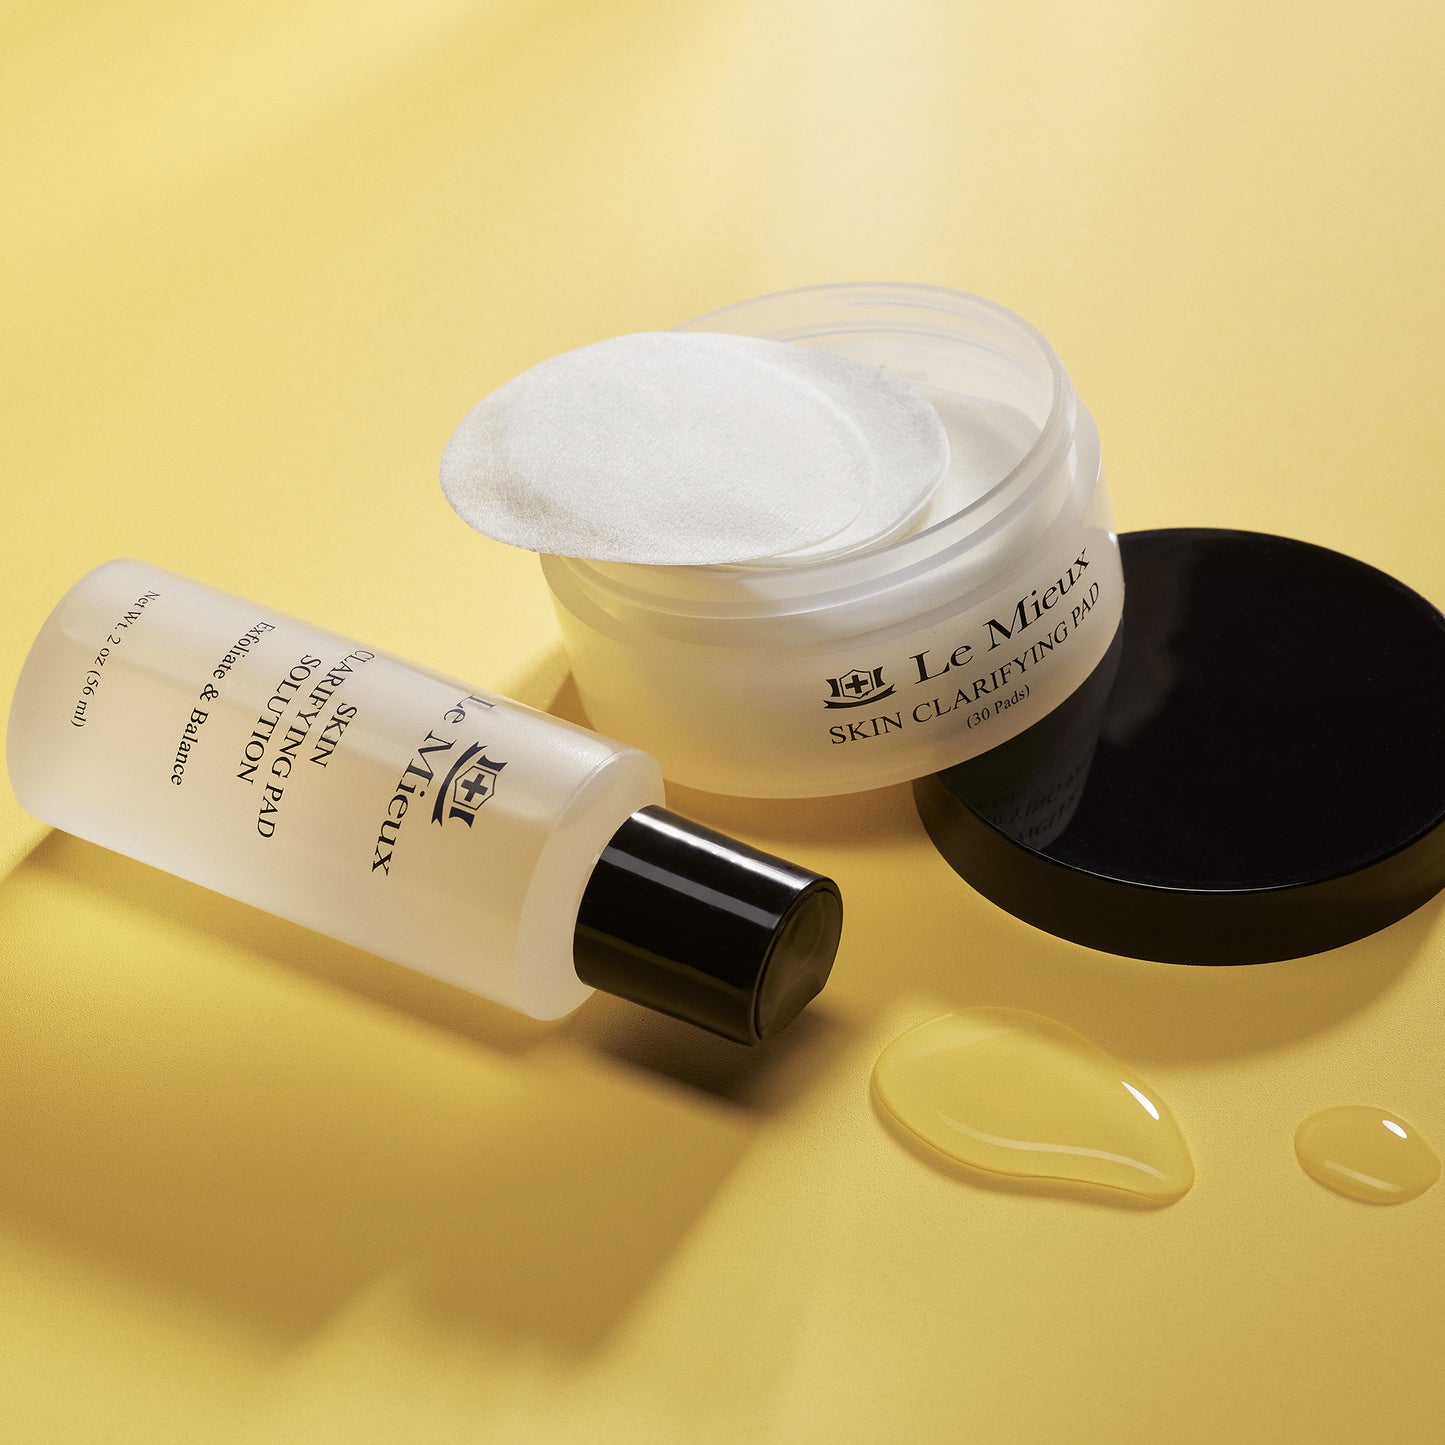 Skin Clarifying Pad Solution (2 oz) resting on it's back behind some drops of solution. Next to them is an open Skin Clarifying Pad container that's tilted against the black lid. All on a yellow backdrop.